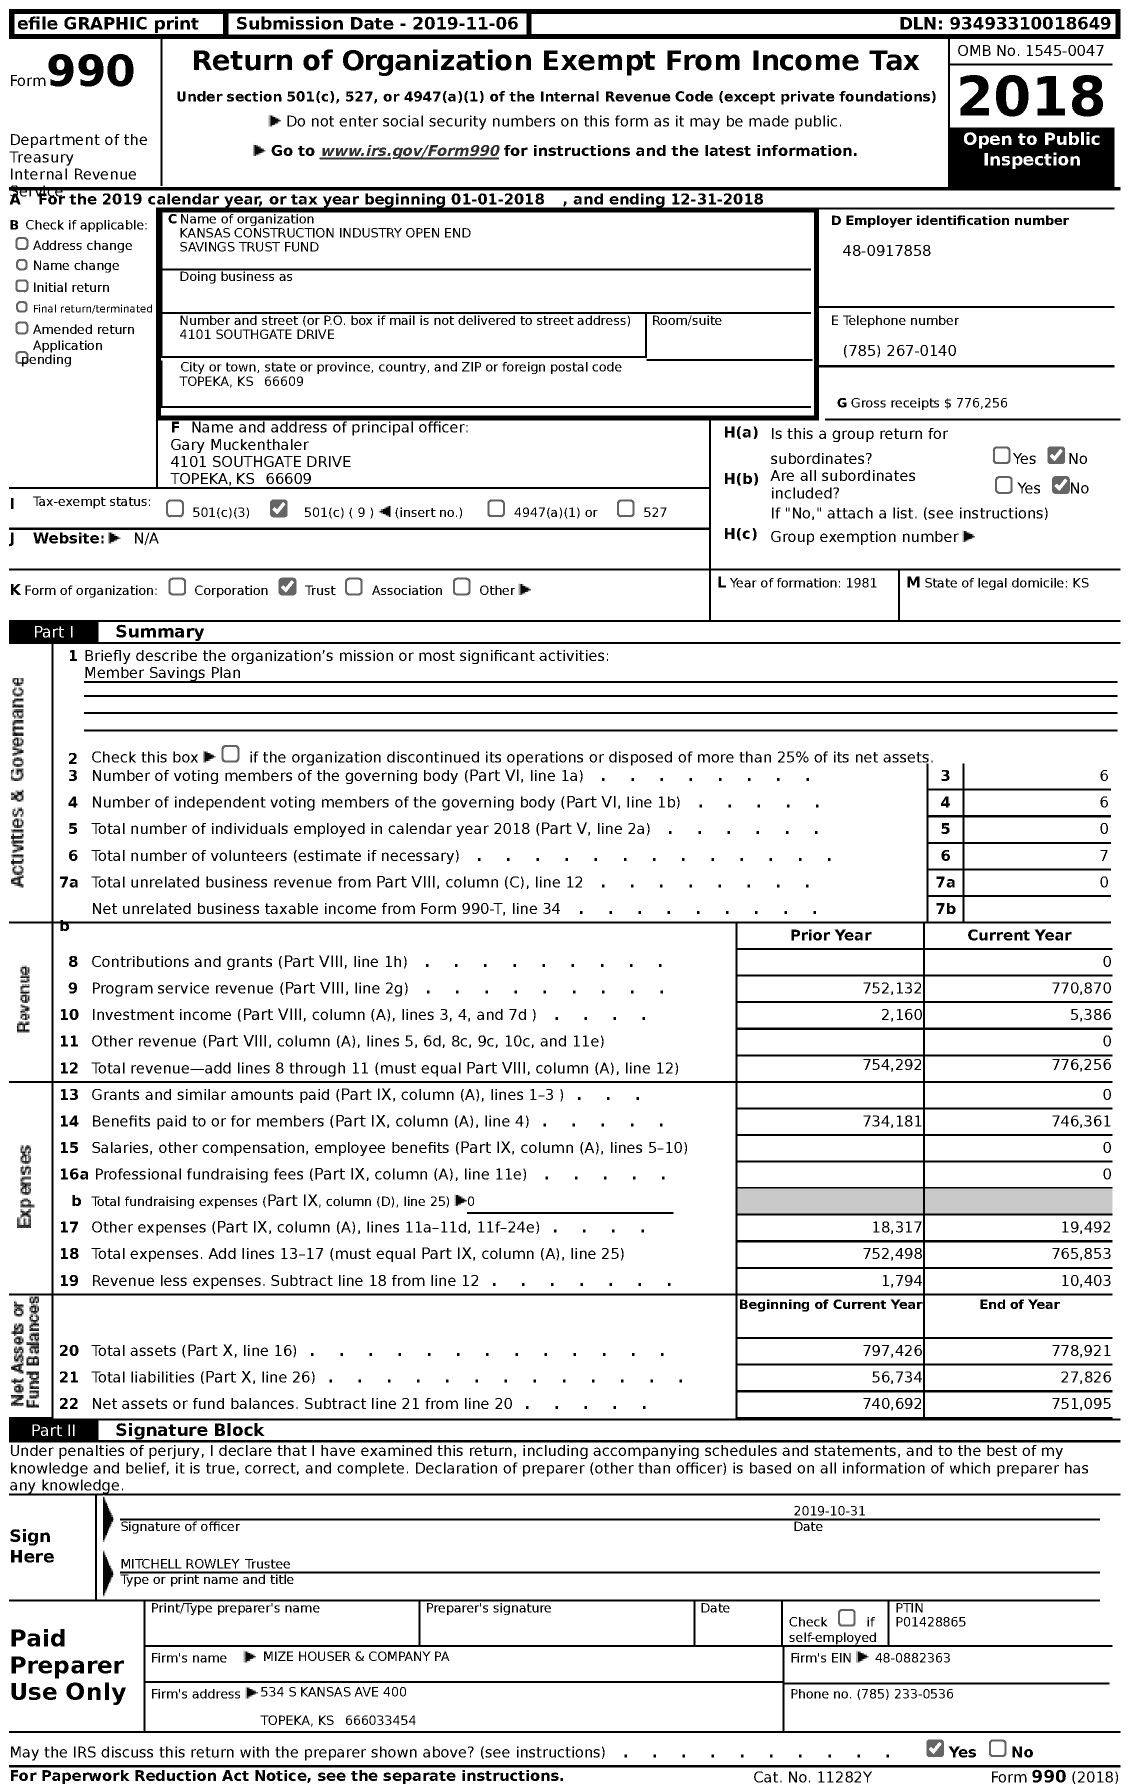 Image of first page of 2018 Form 990 for Kansas Construction Industry Open End Savings Trust Fund